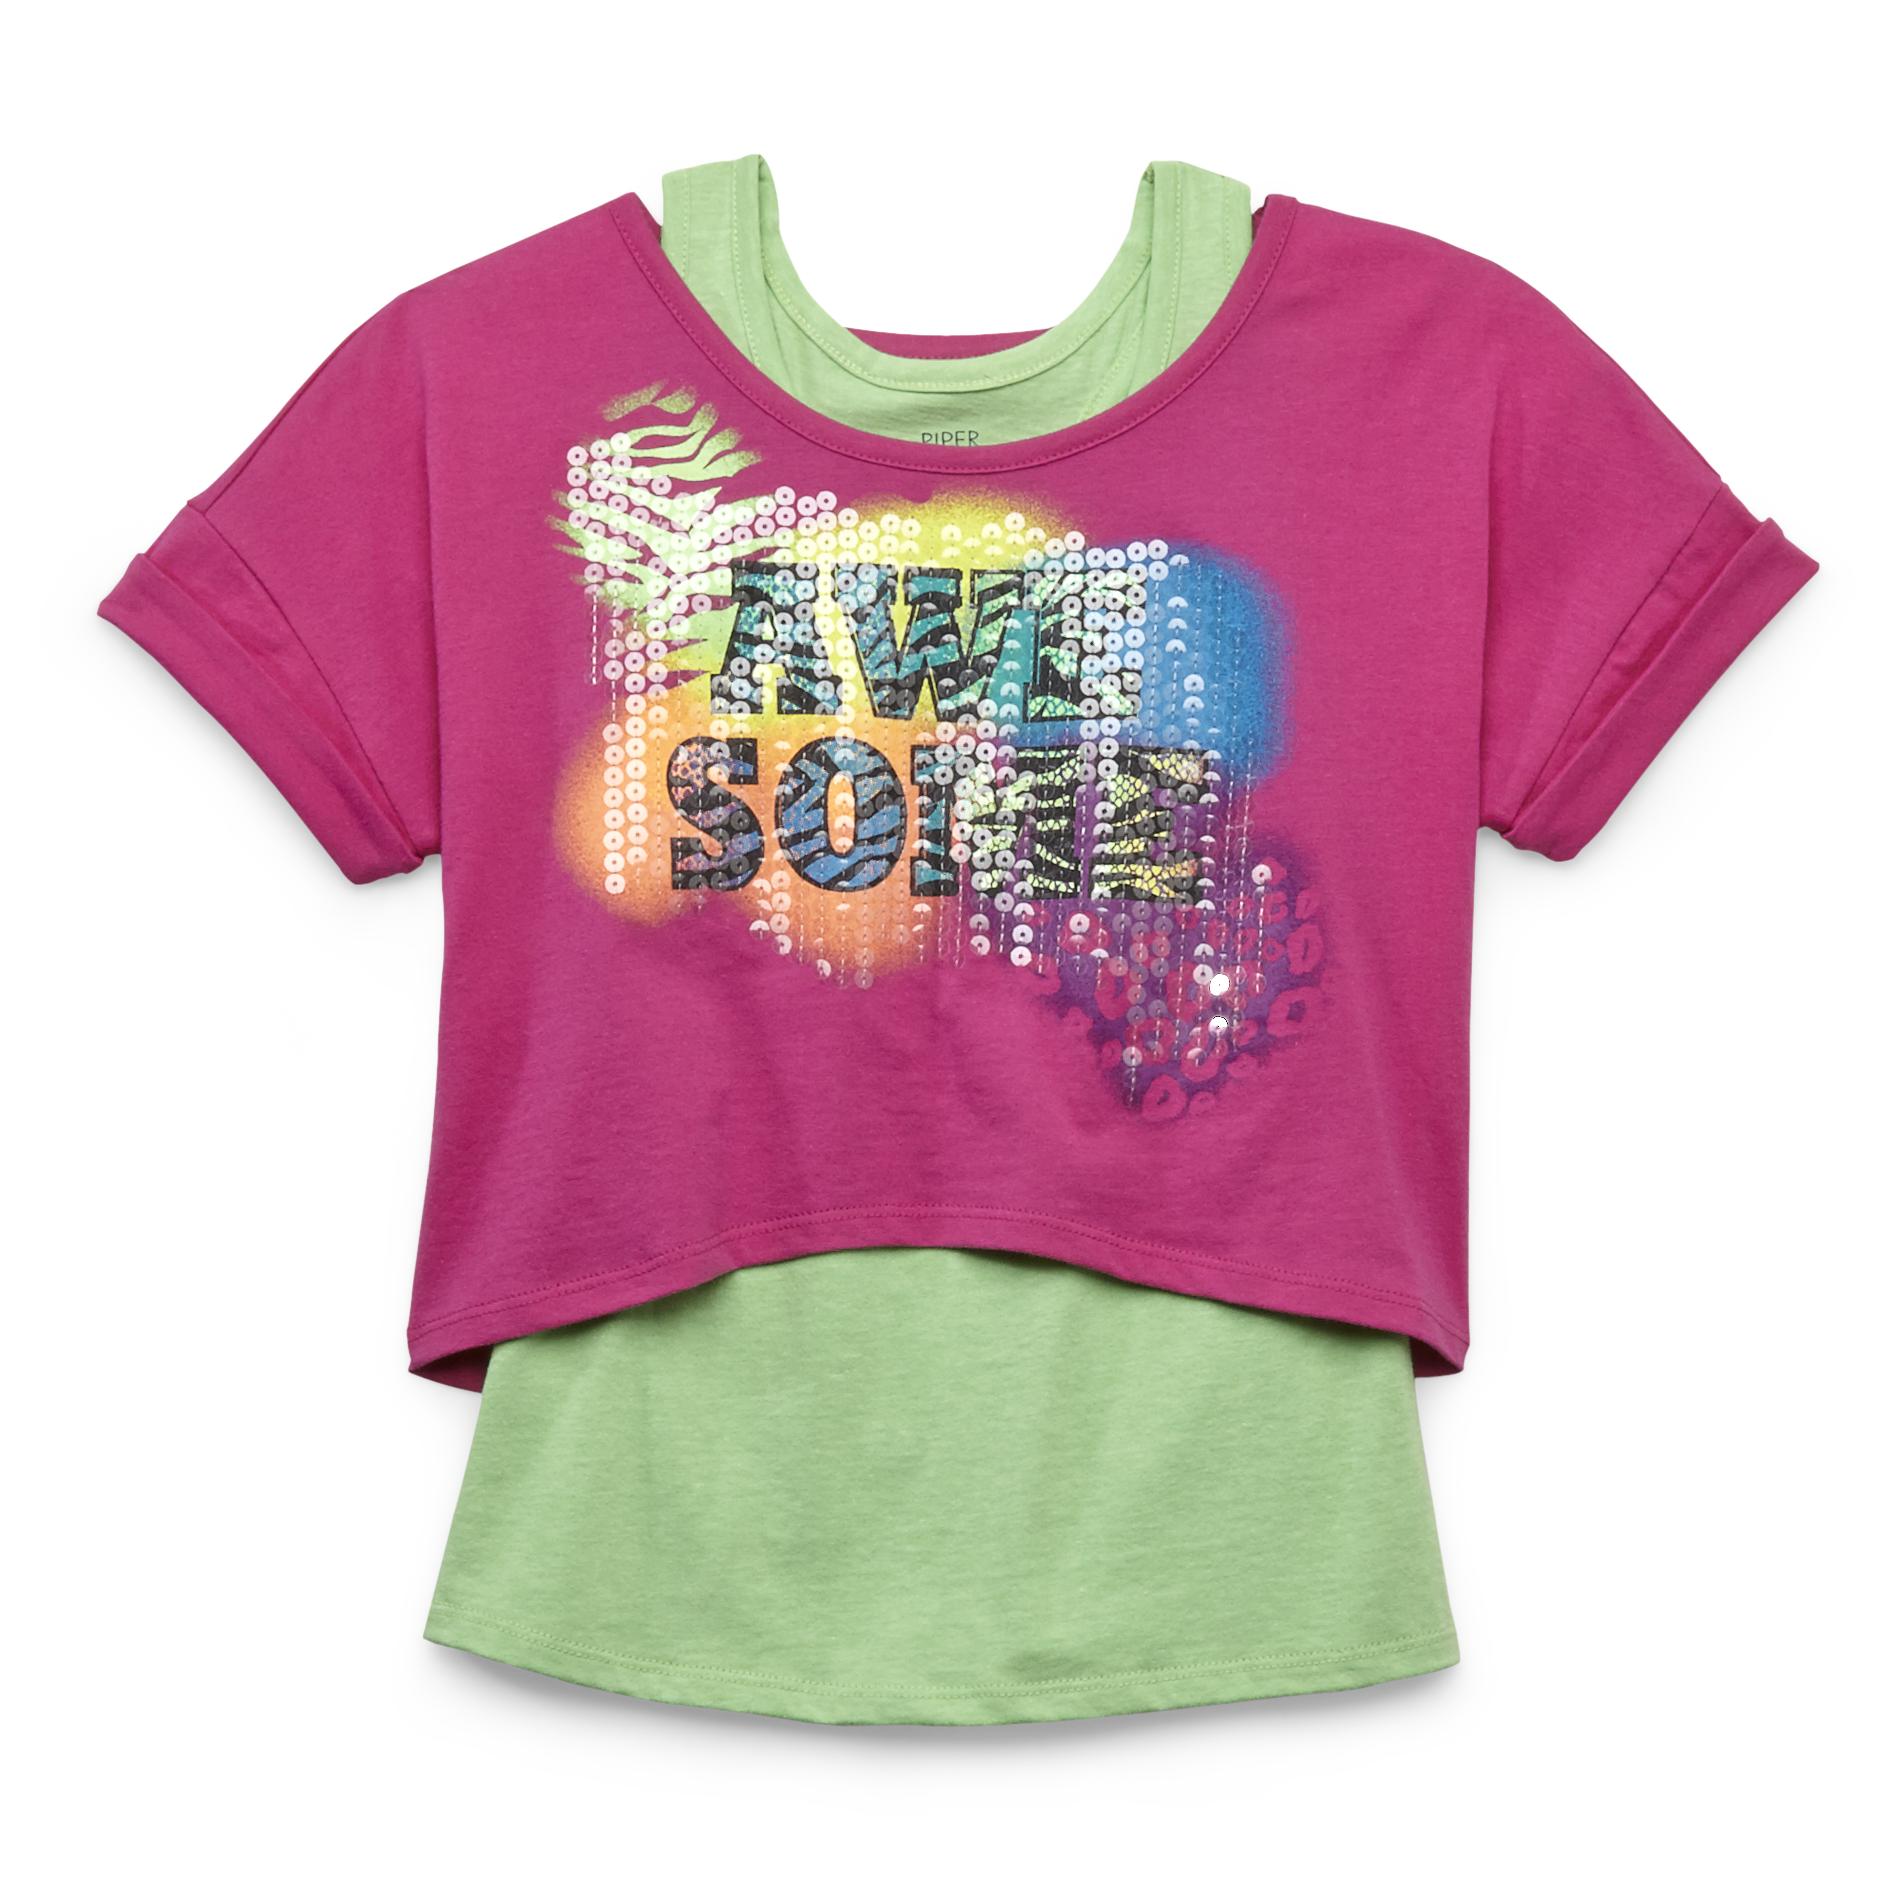 Piper Active Girl's Tank Top & T-Shirt - Awesome